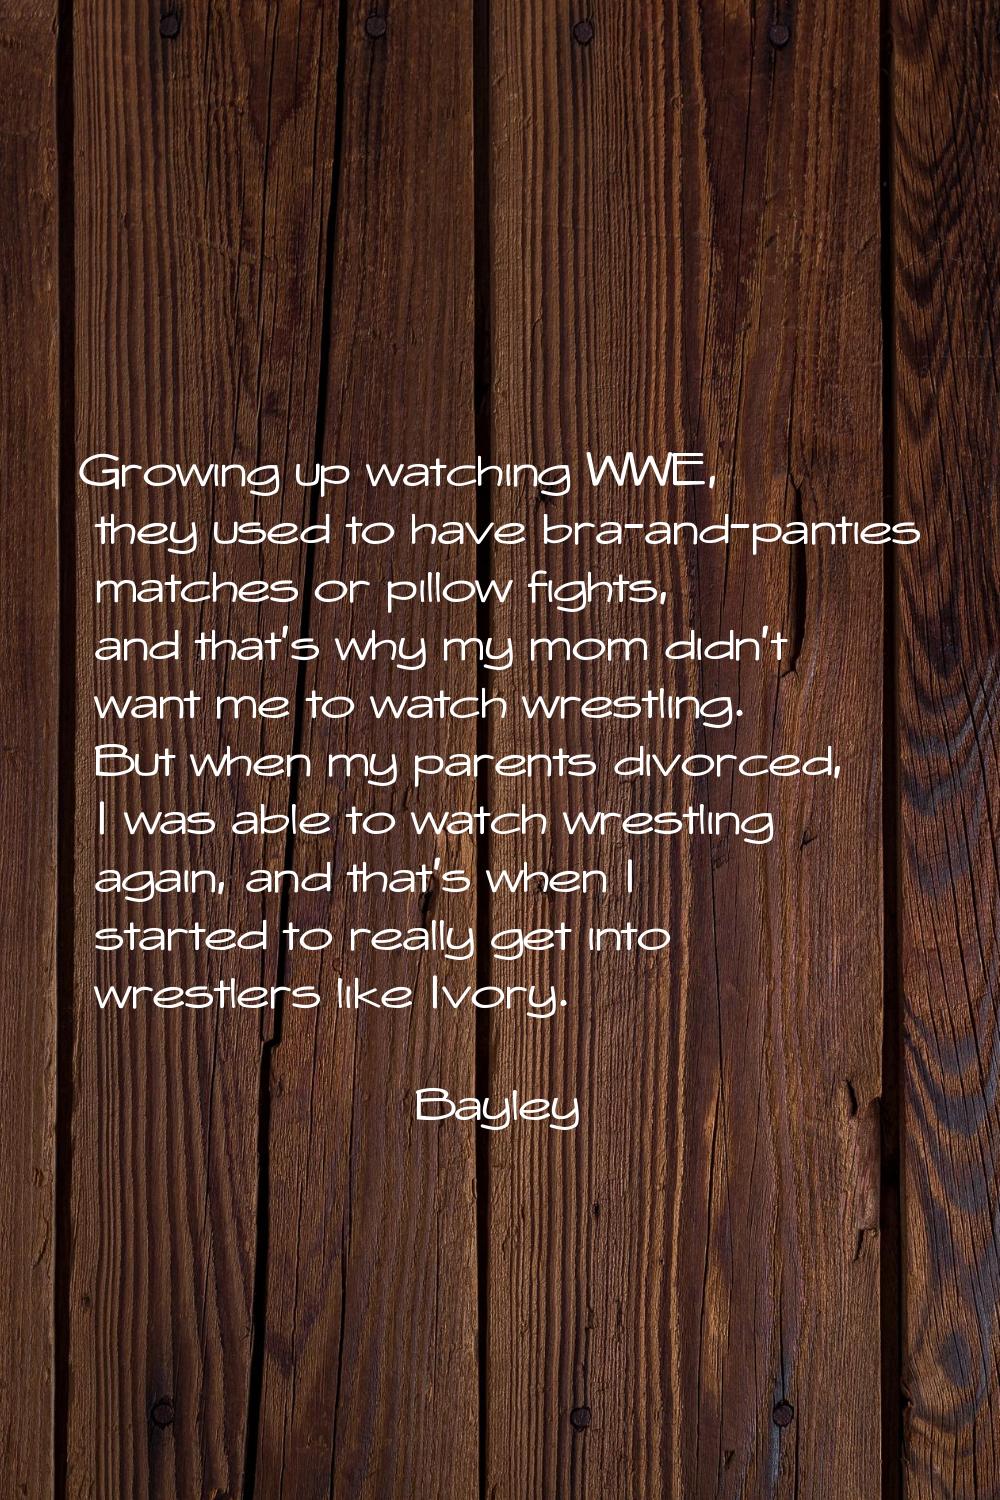 Growing up watching WWE, they used to have bra-and-panties matches or pillow fights, and that's why